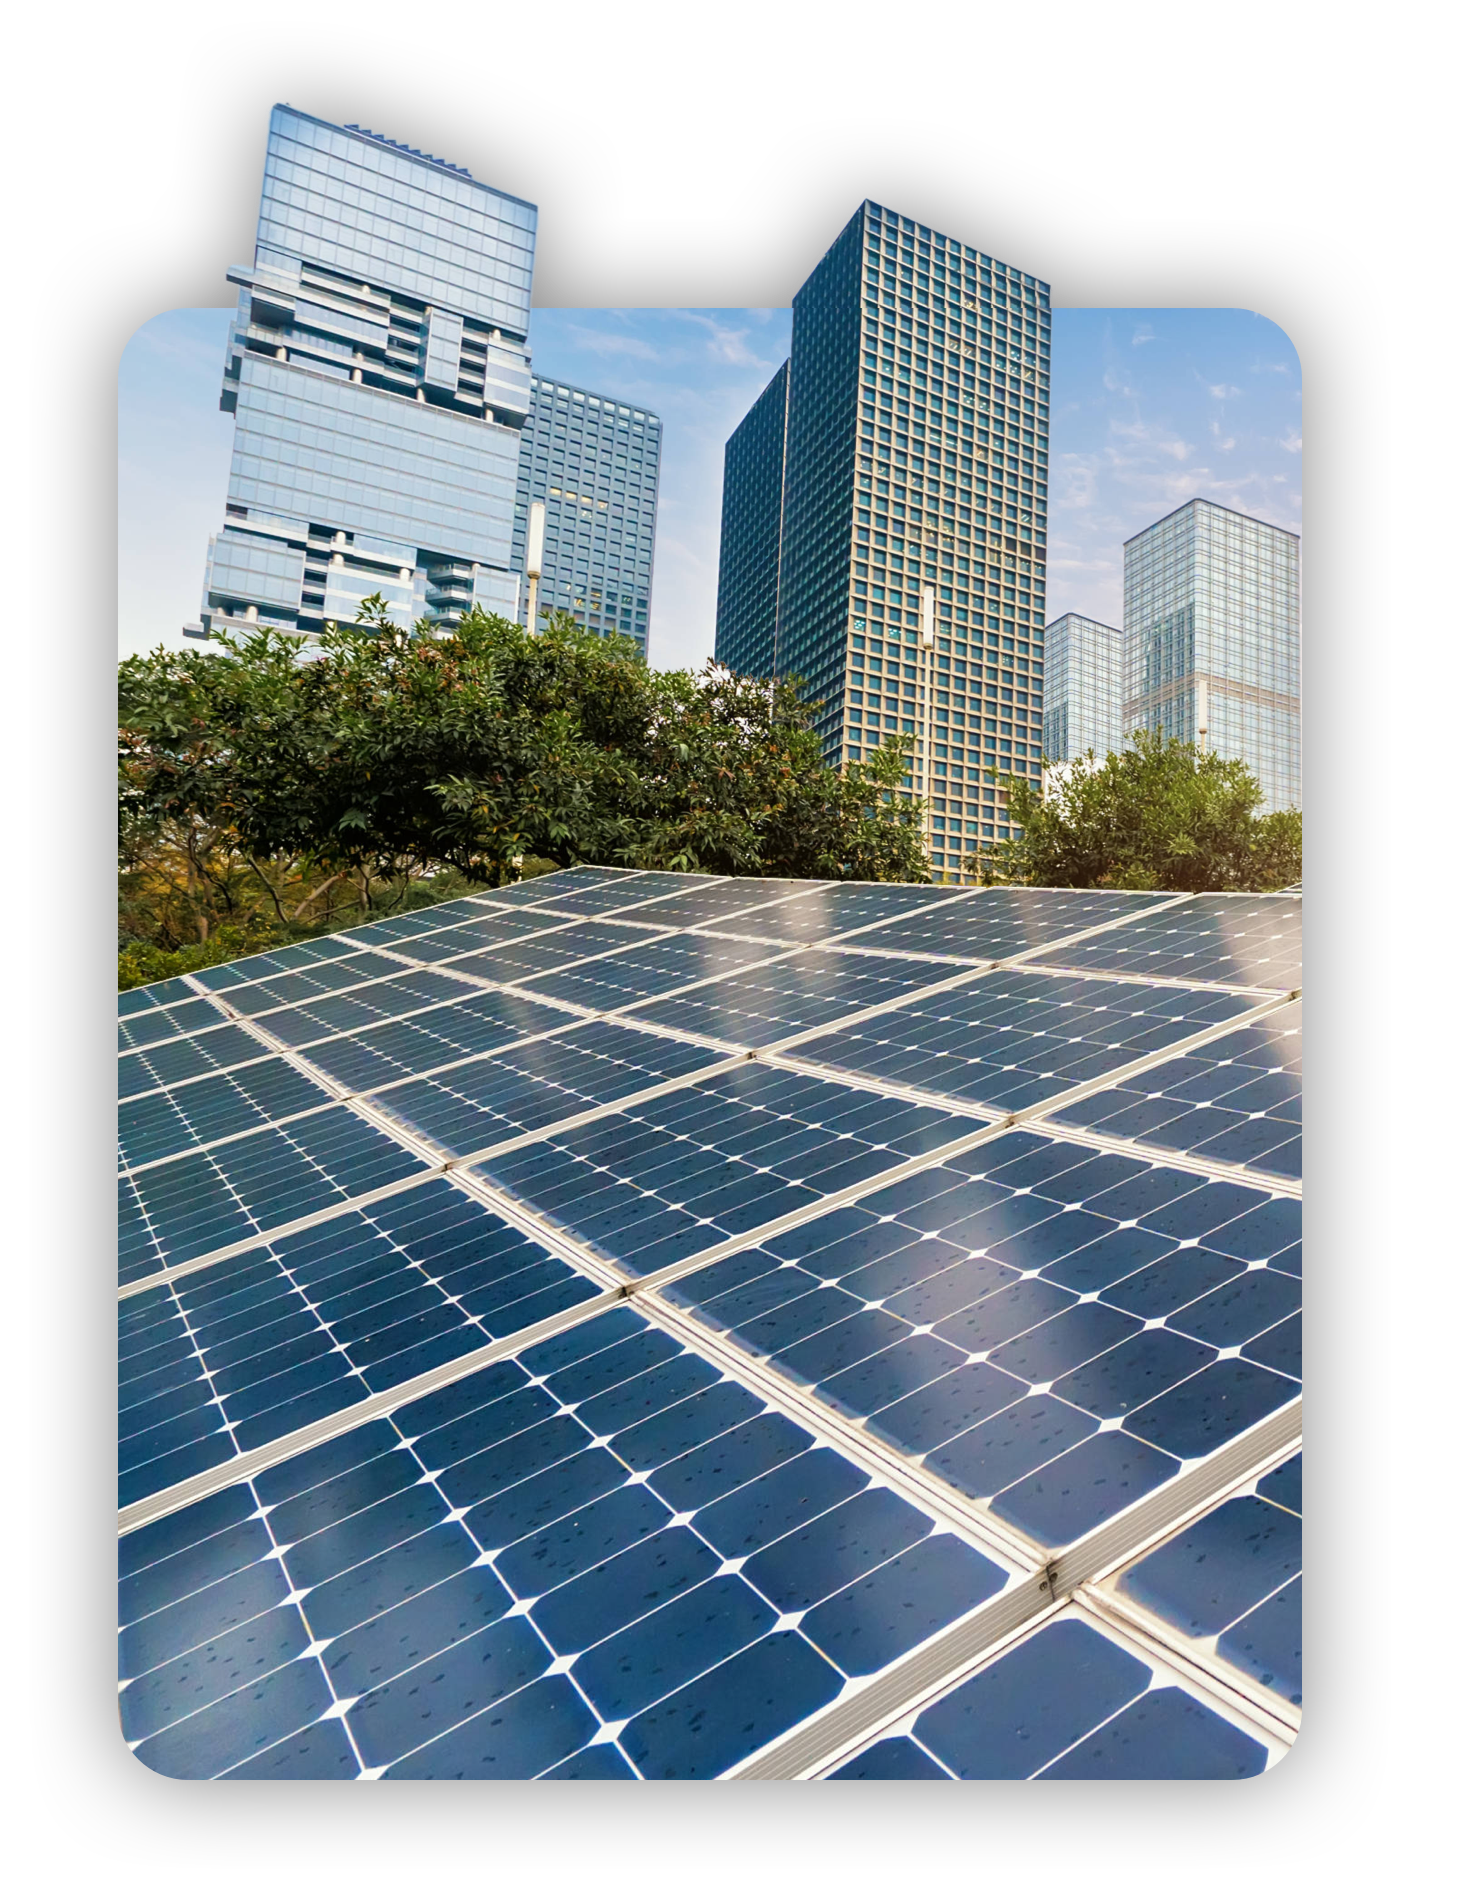 A solar power system provides green energy for home or commercial business locations. As a home or business owner, a solar system can lower energy costs, saving potentially tens of thousands of dollars over the life of the solar panel system.